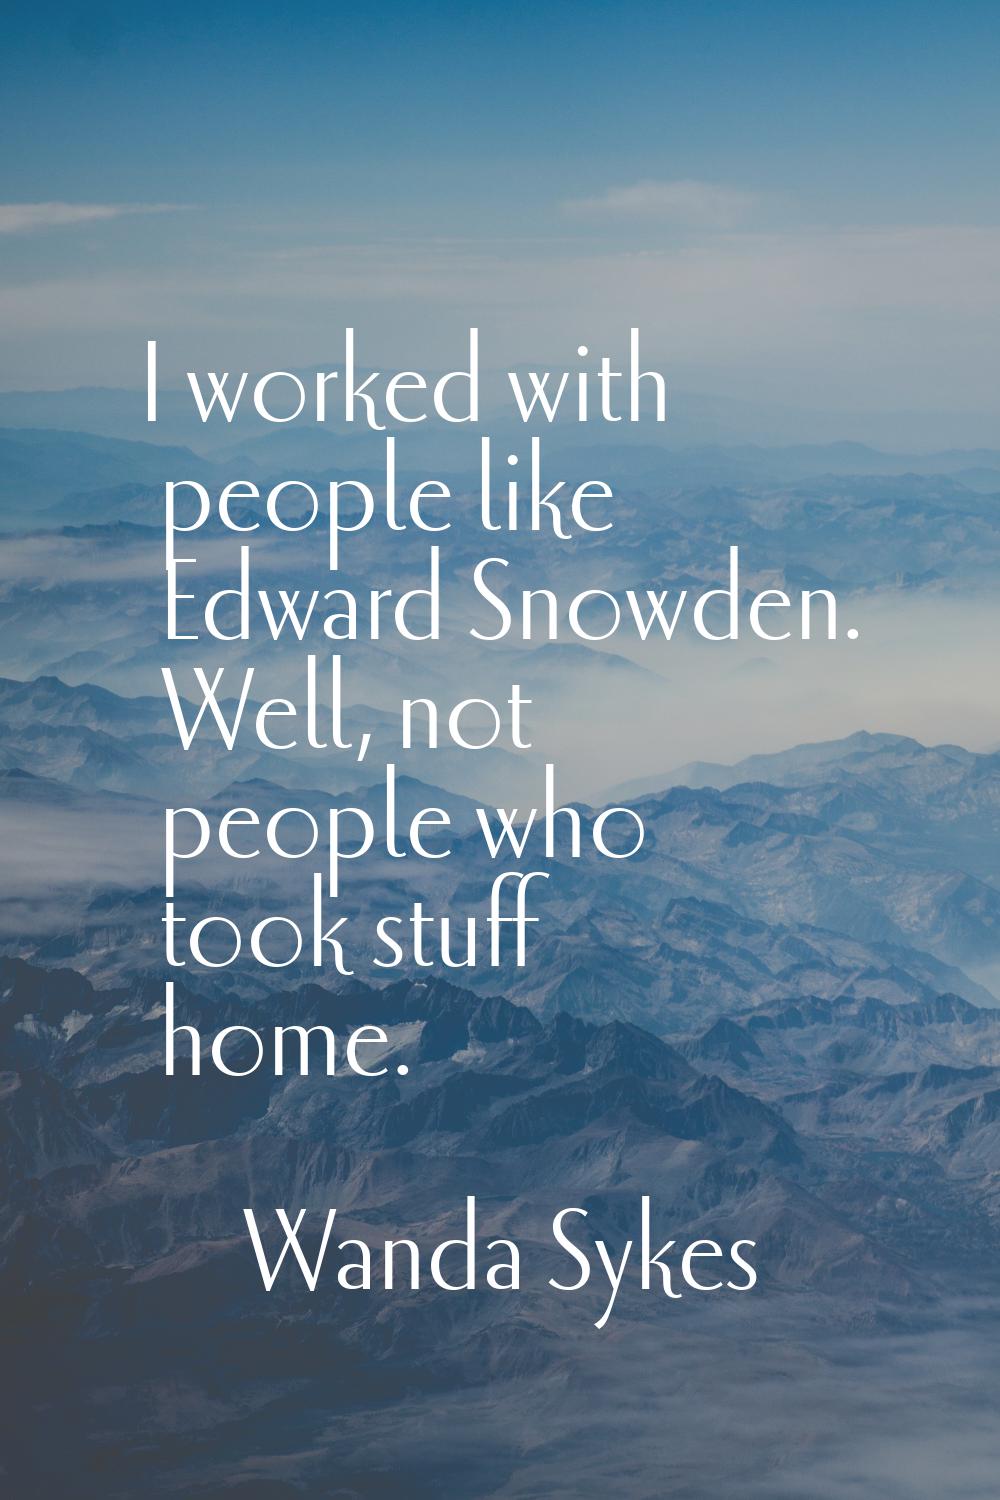 I worked with people like Edward Snowden. Well, not people who took stuff home.